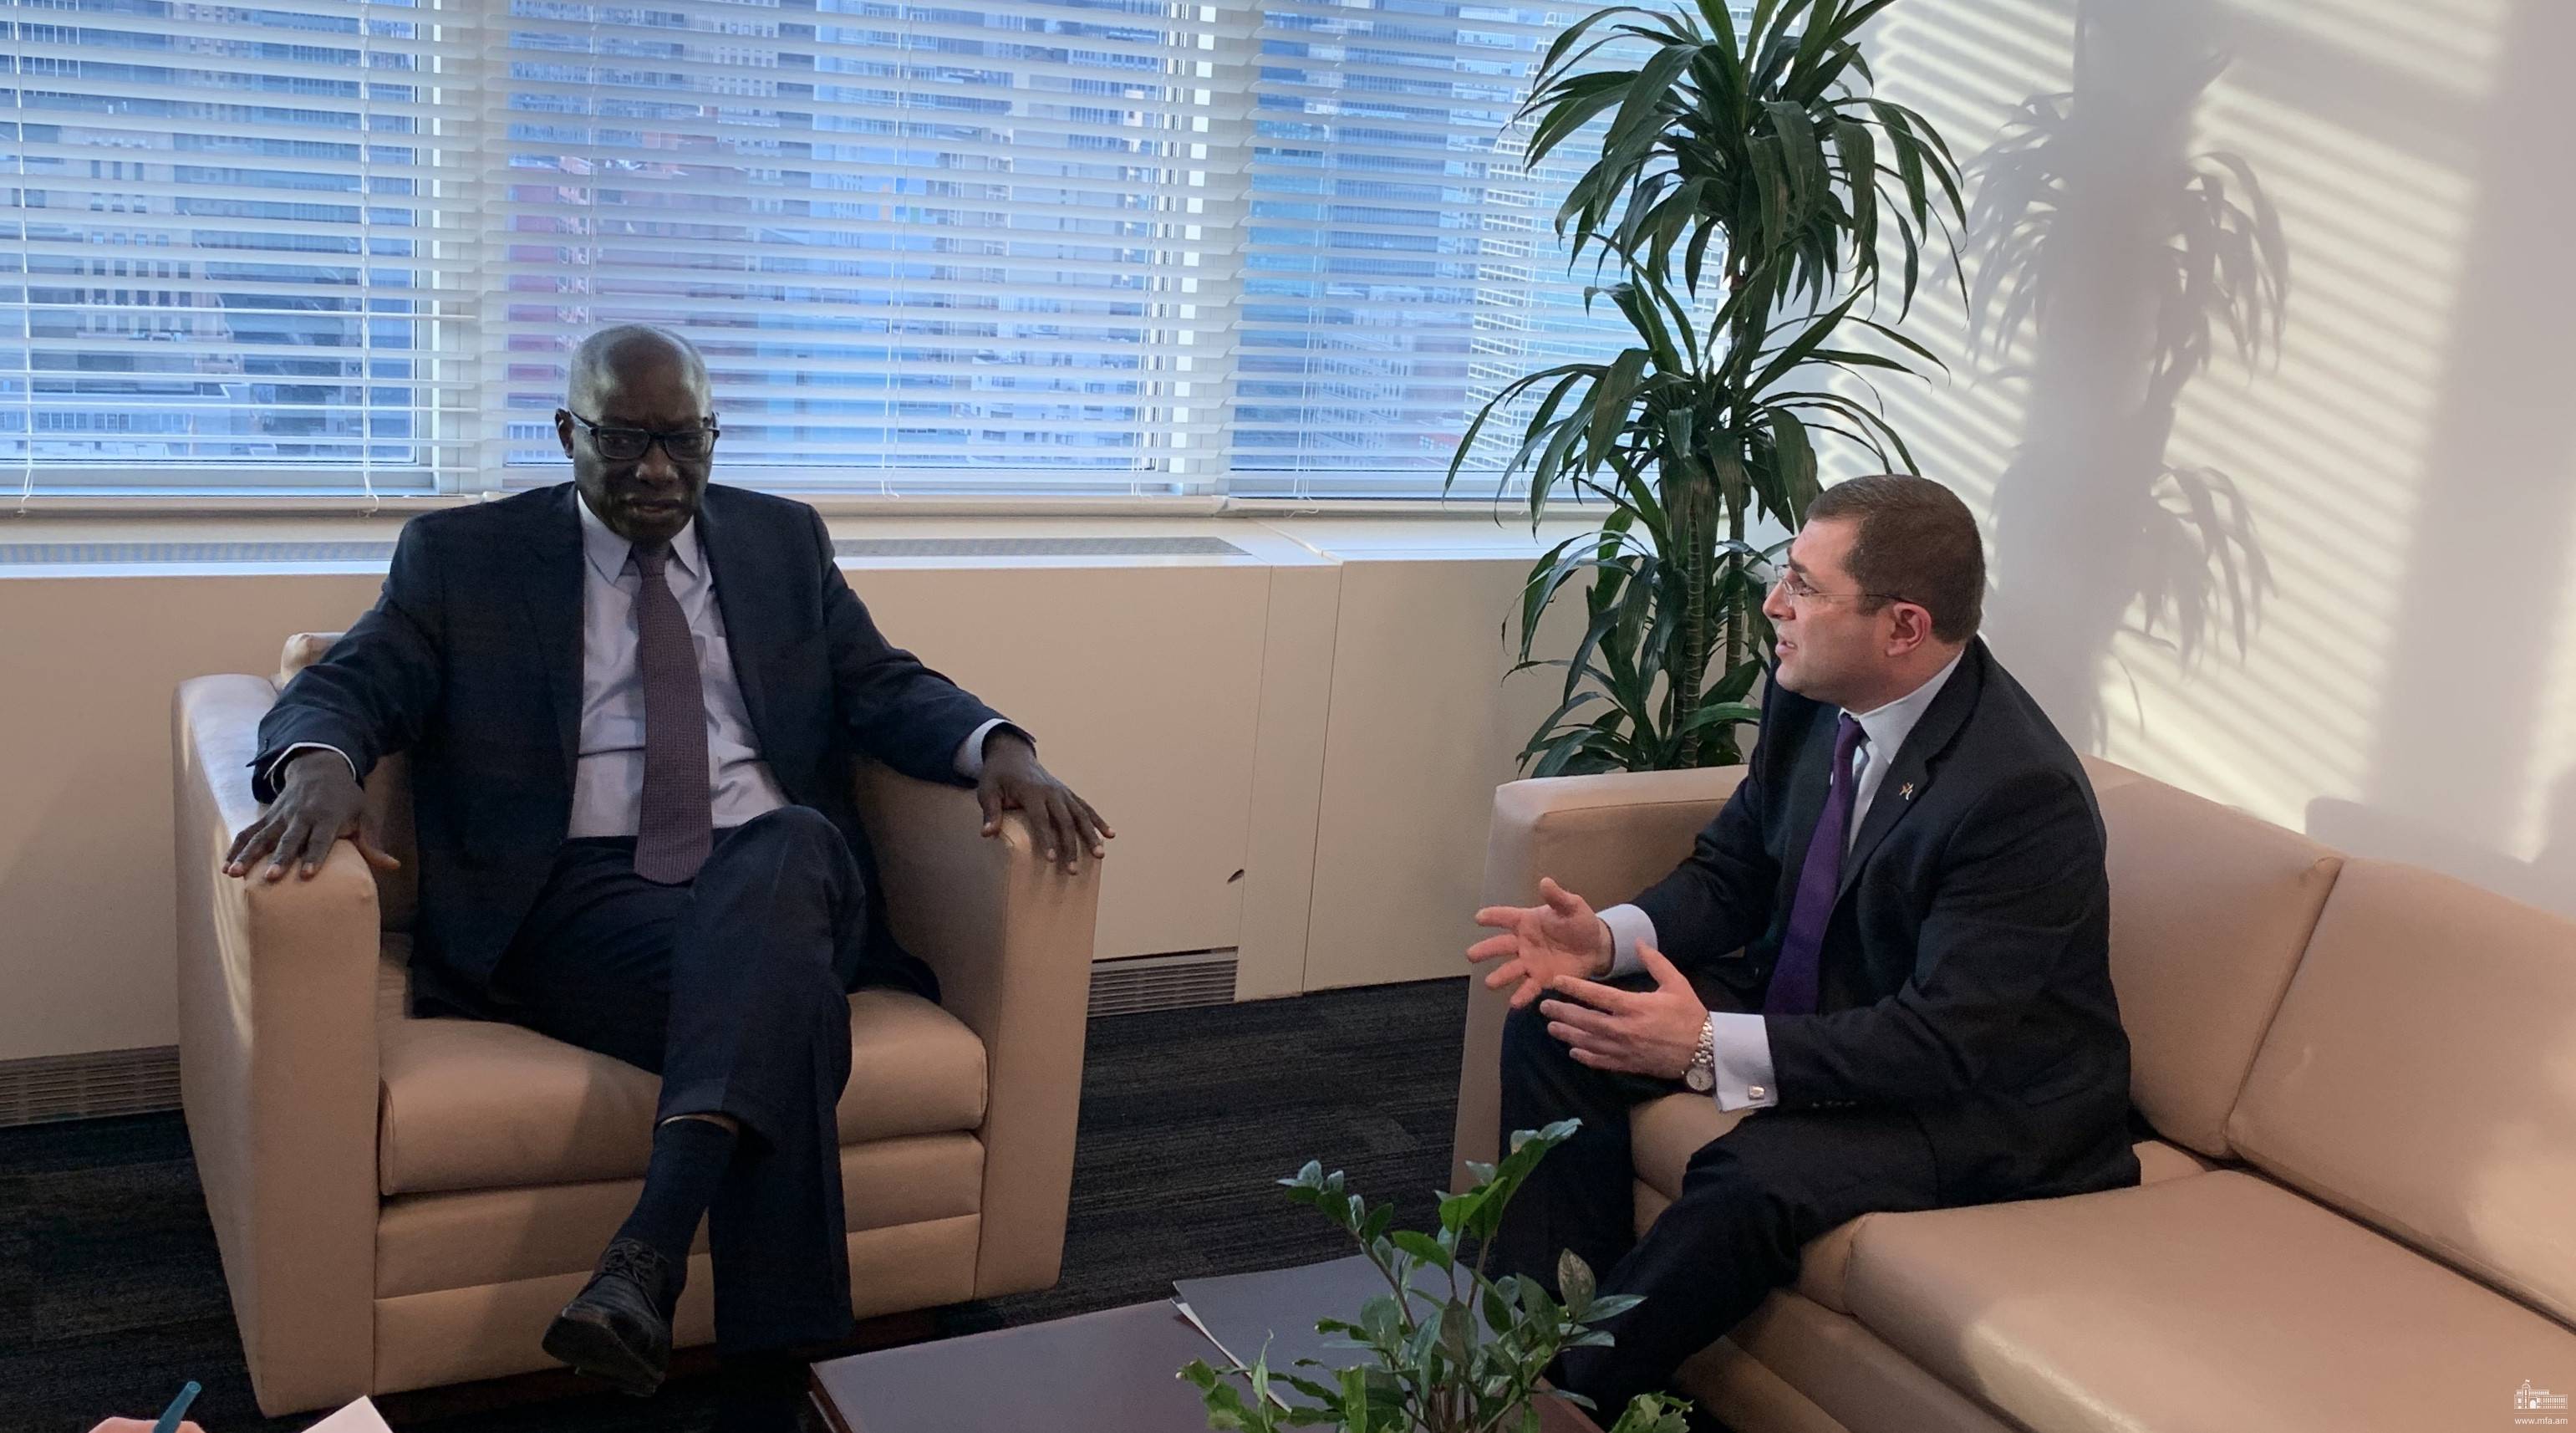 Armenia’s Permanent Representative to the United Nations met with the Special Adviser of the UN Secretary-General on the Prevention of Genocide